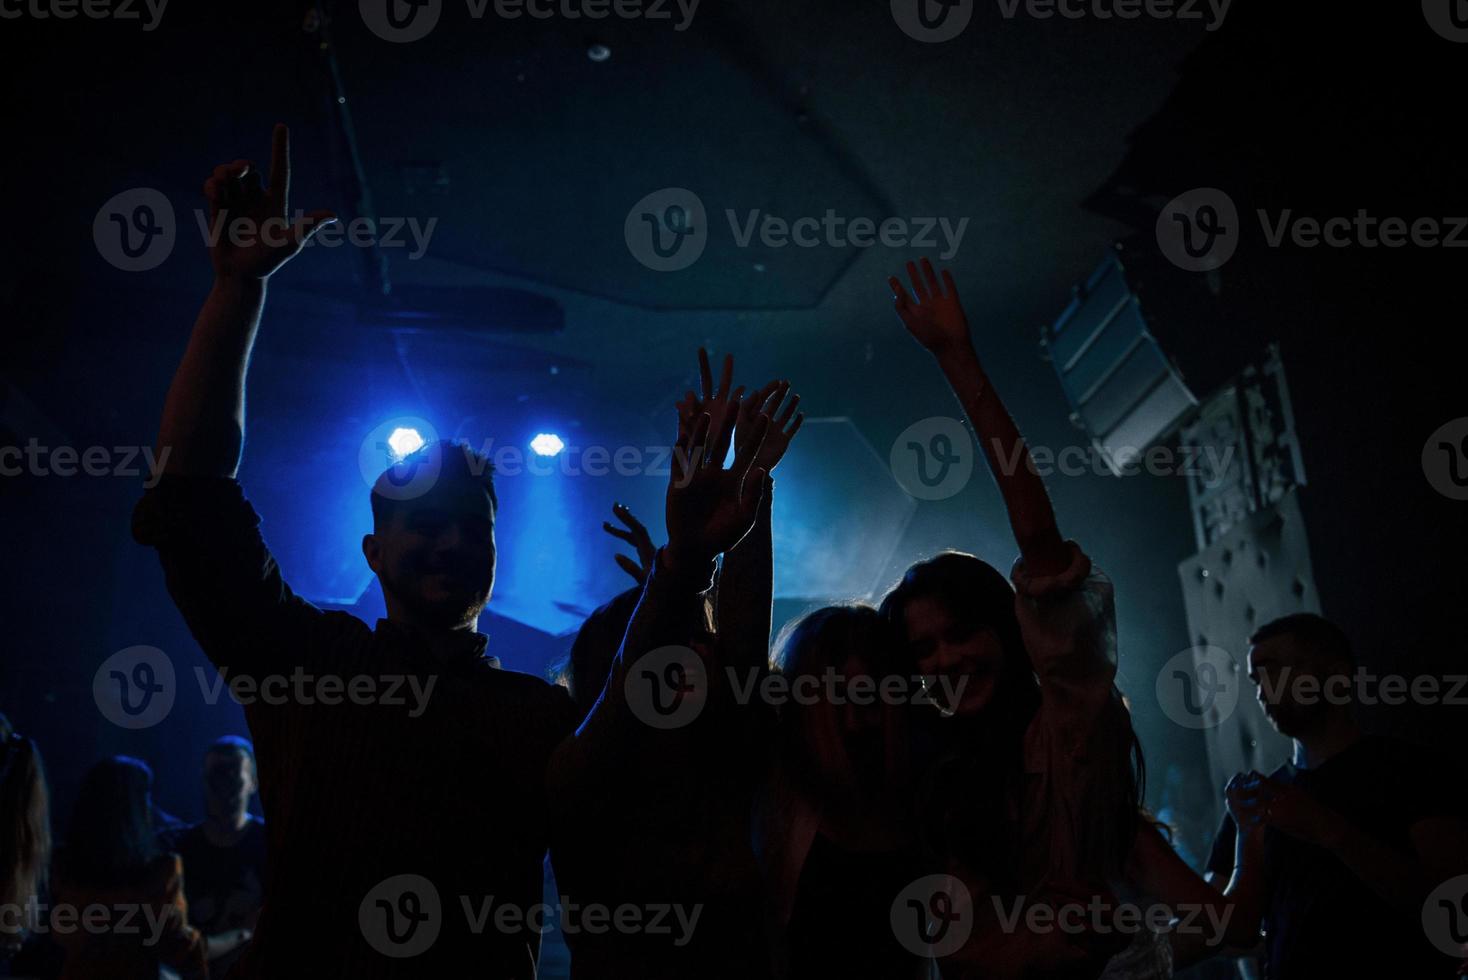 We are getting captured by cameramen. Group of people that enjoying dancing in the nightclub with beautiful lightings photo